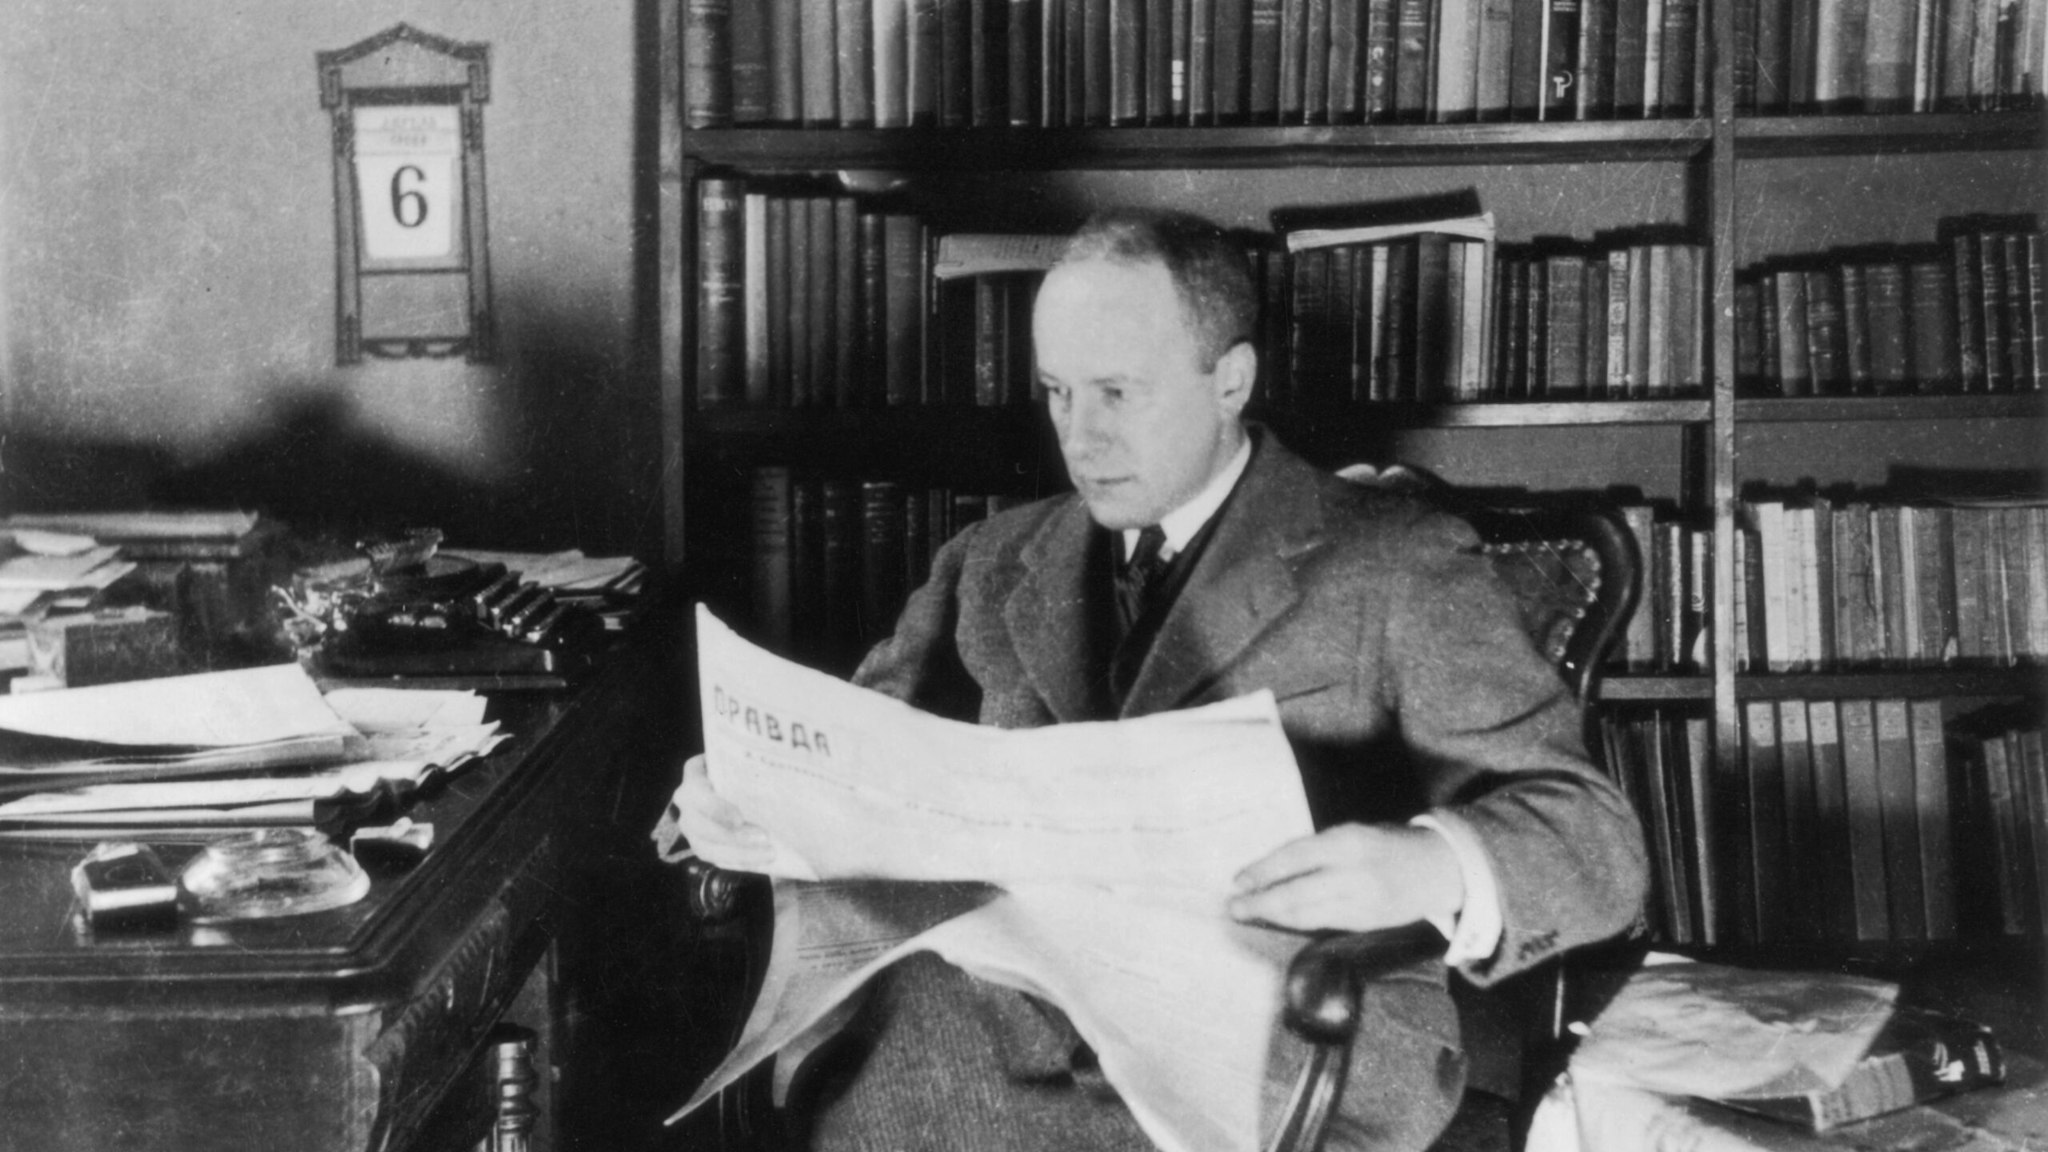 British-born journalist Walter Duranty (1884 - 1957), the Moscow correspondent for the New York Times, reading a copy of 'Pravda', circa 1925.